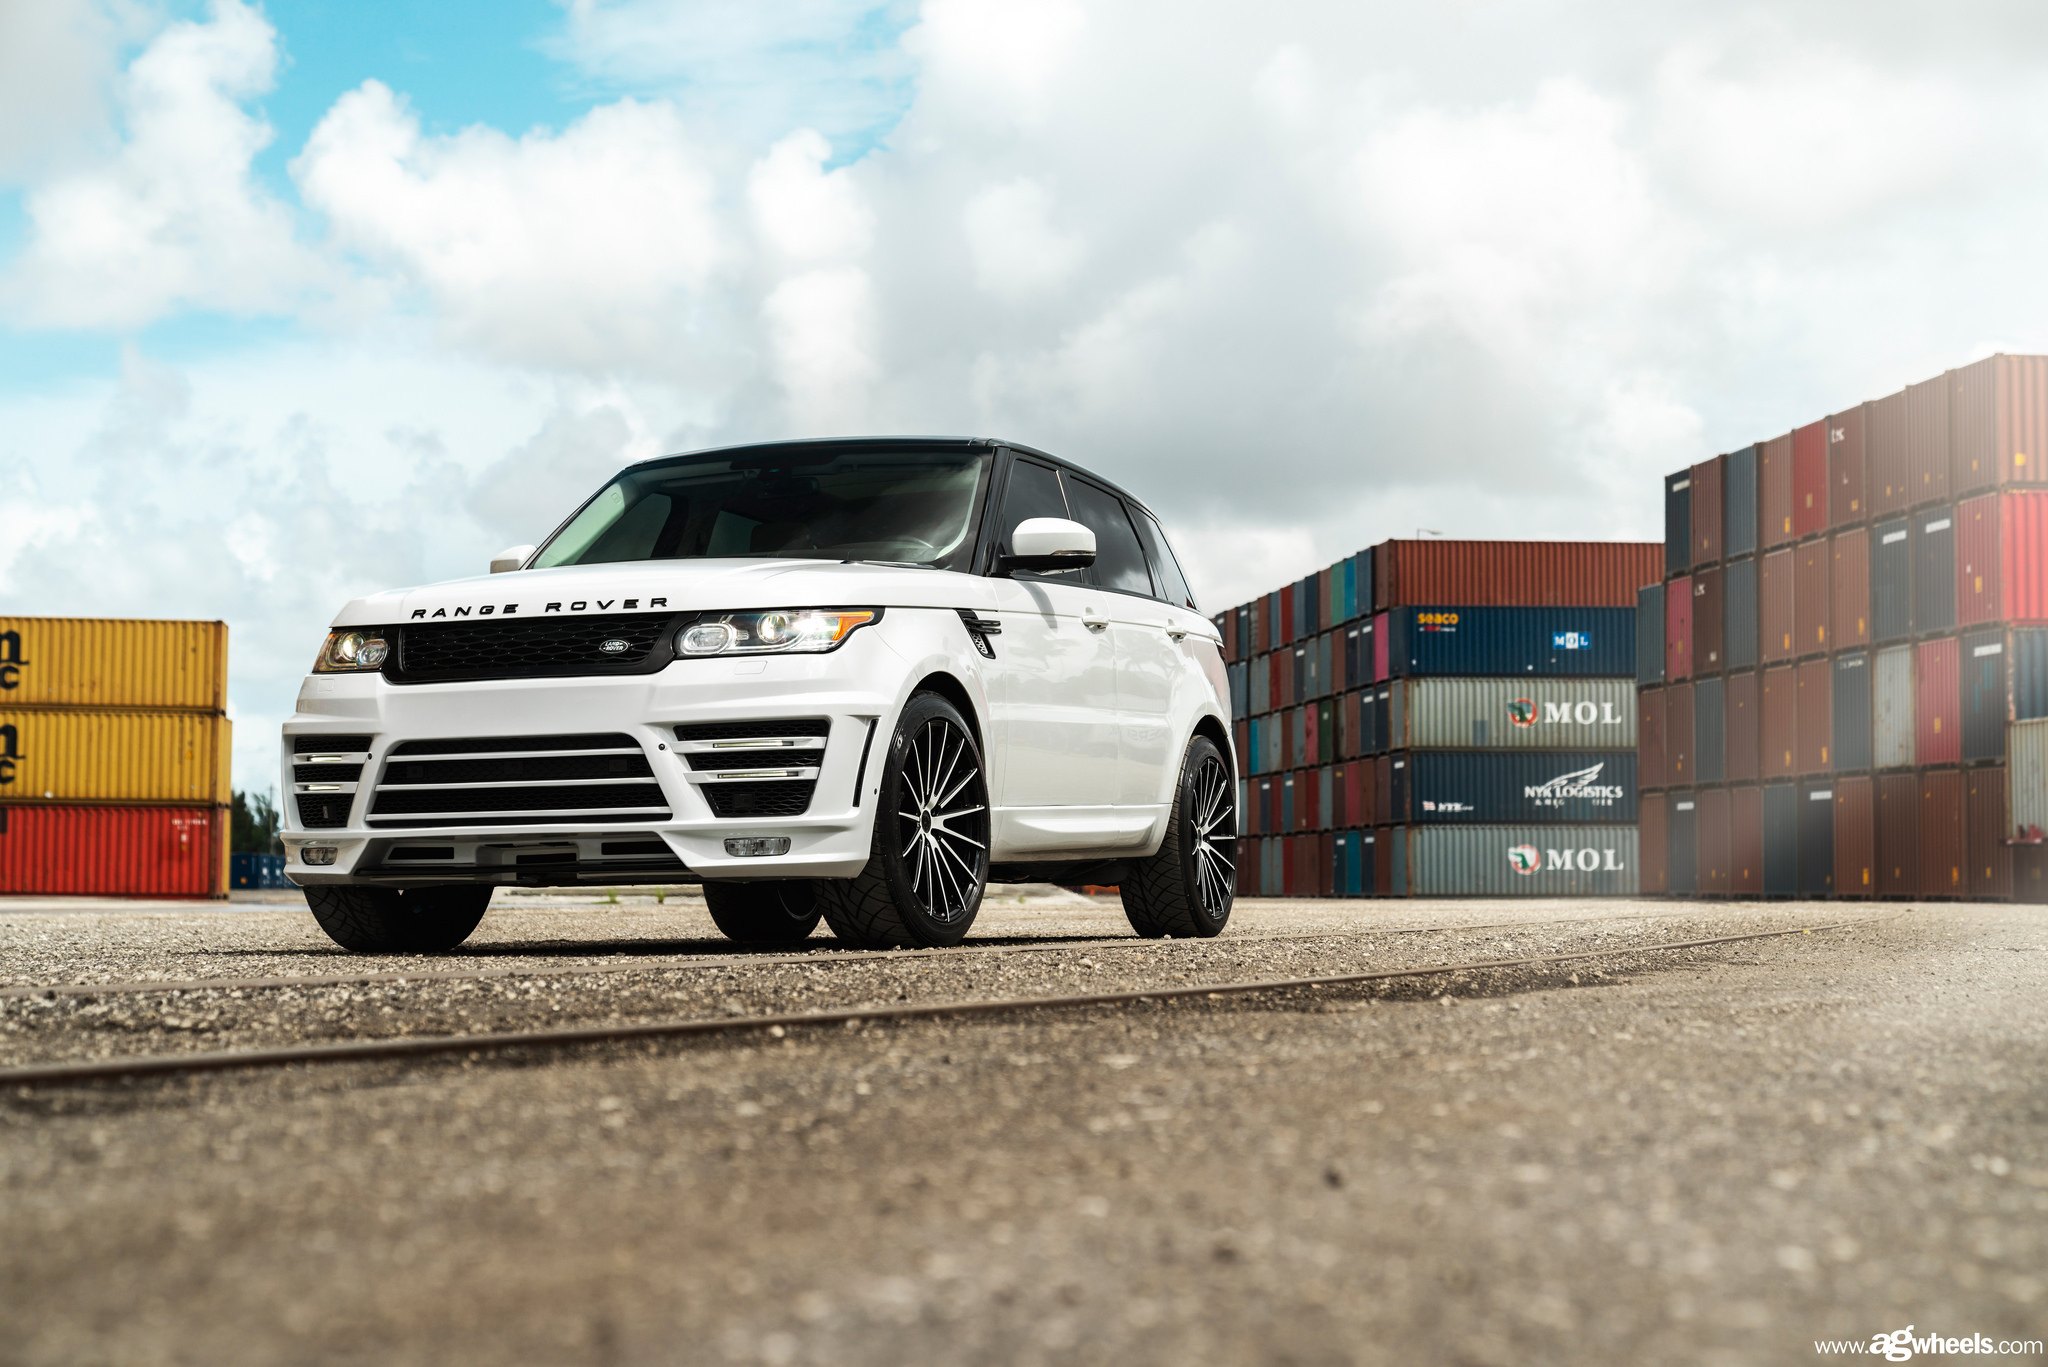 White Range Rover Sport with Blacked Out Grille - Photo by Avant Garde Wheels